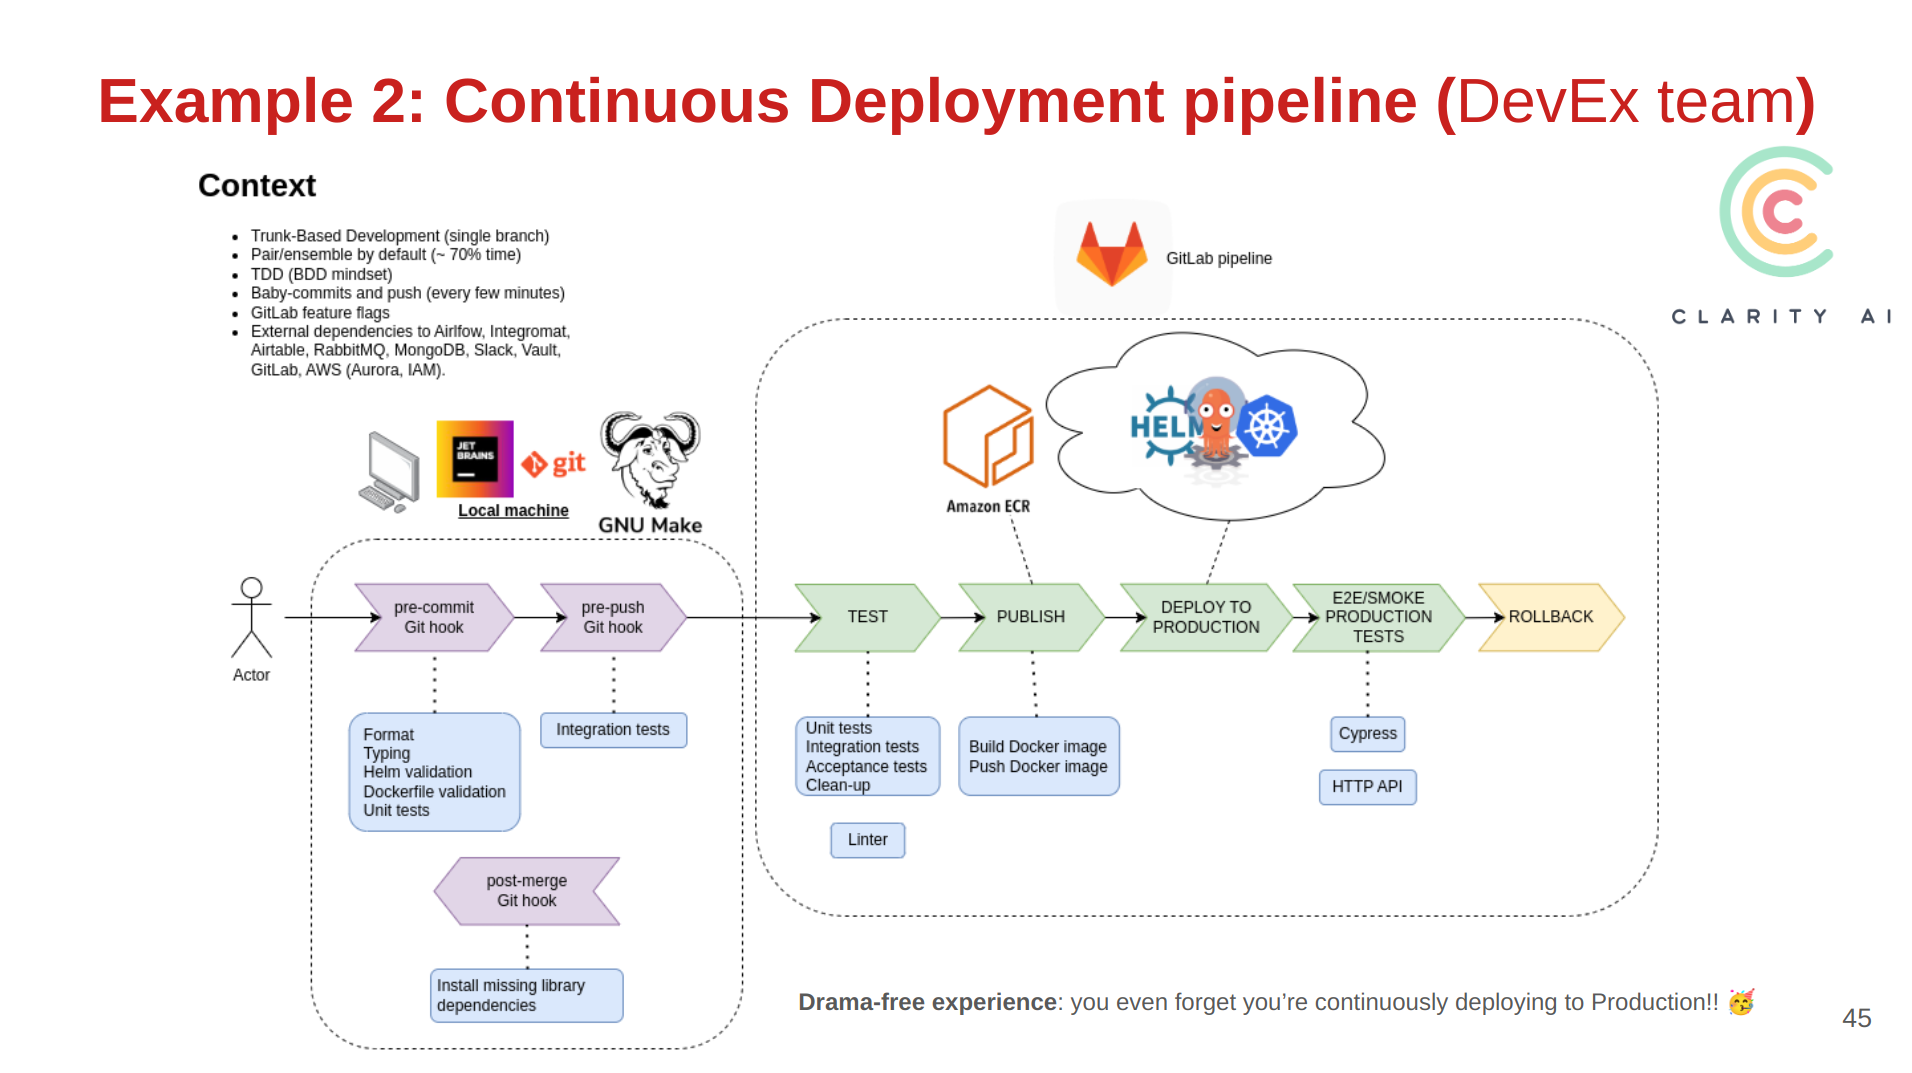 Diagram with a Continuous Deployment pipeline